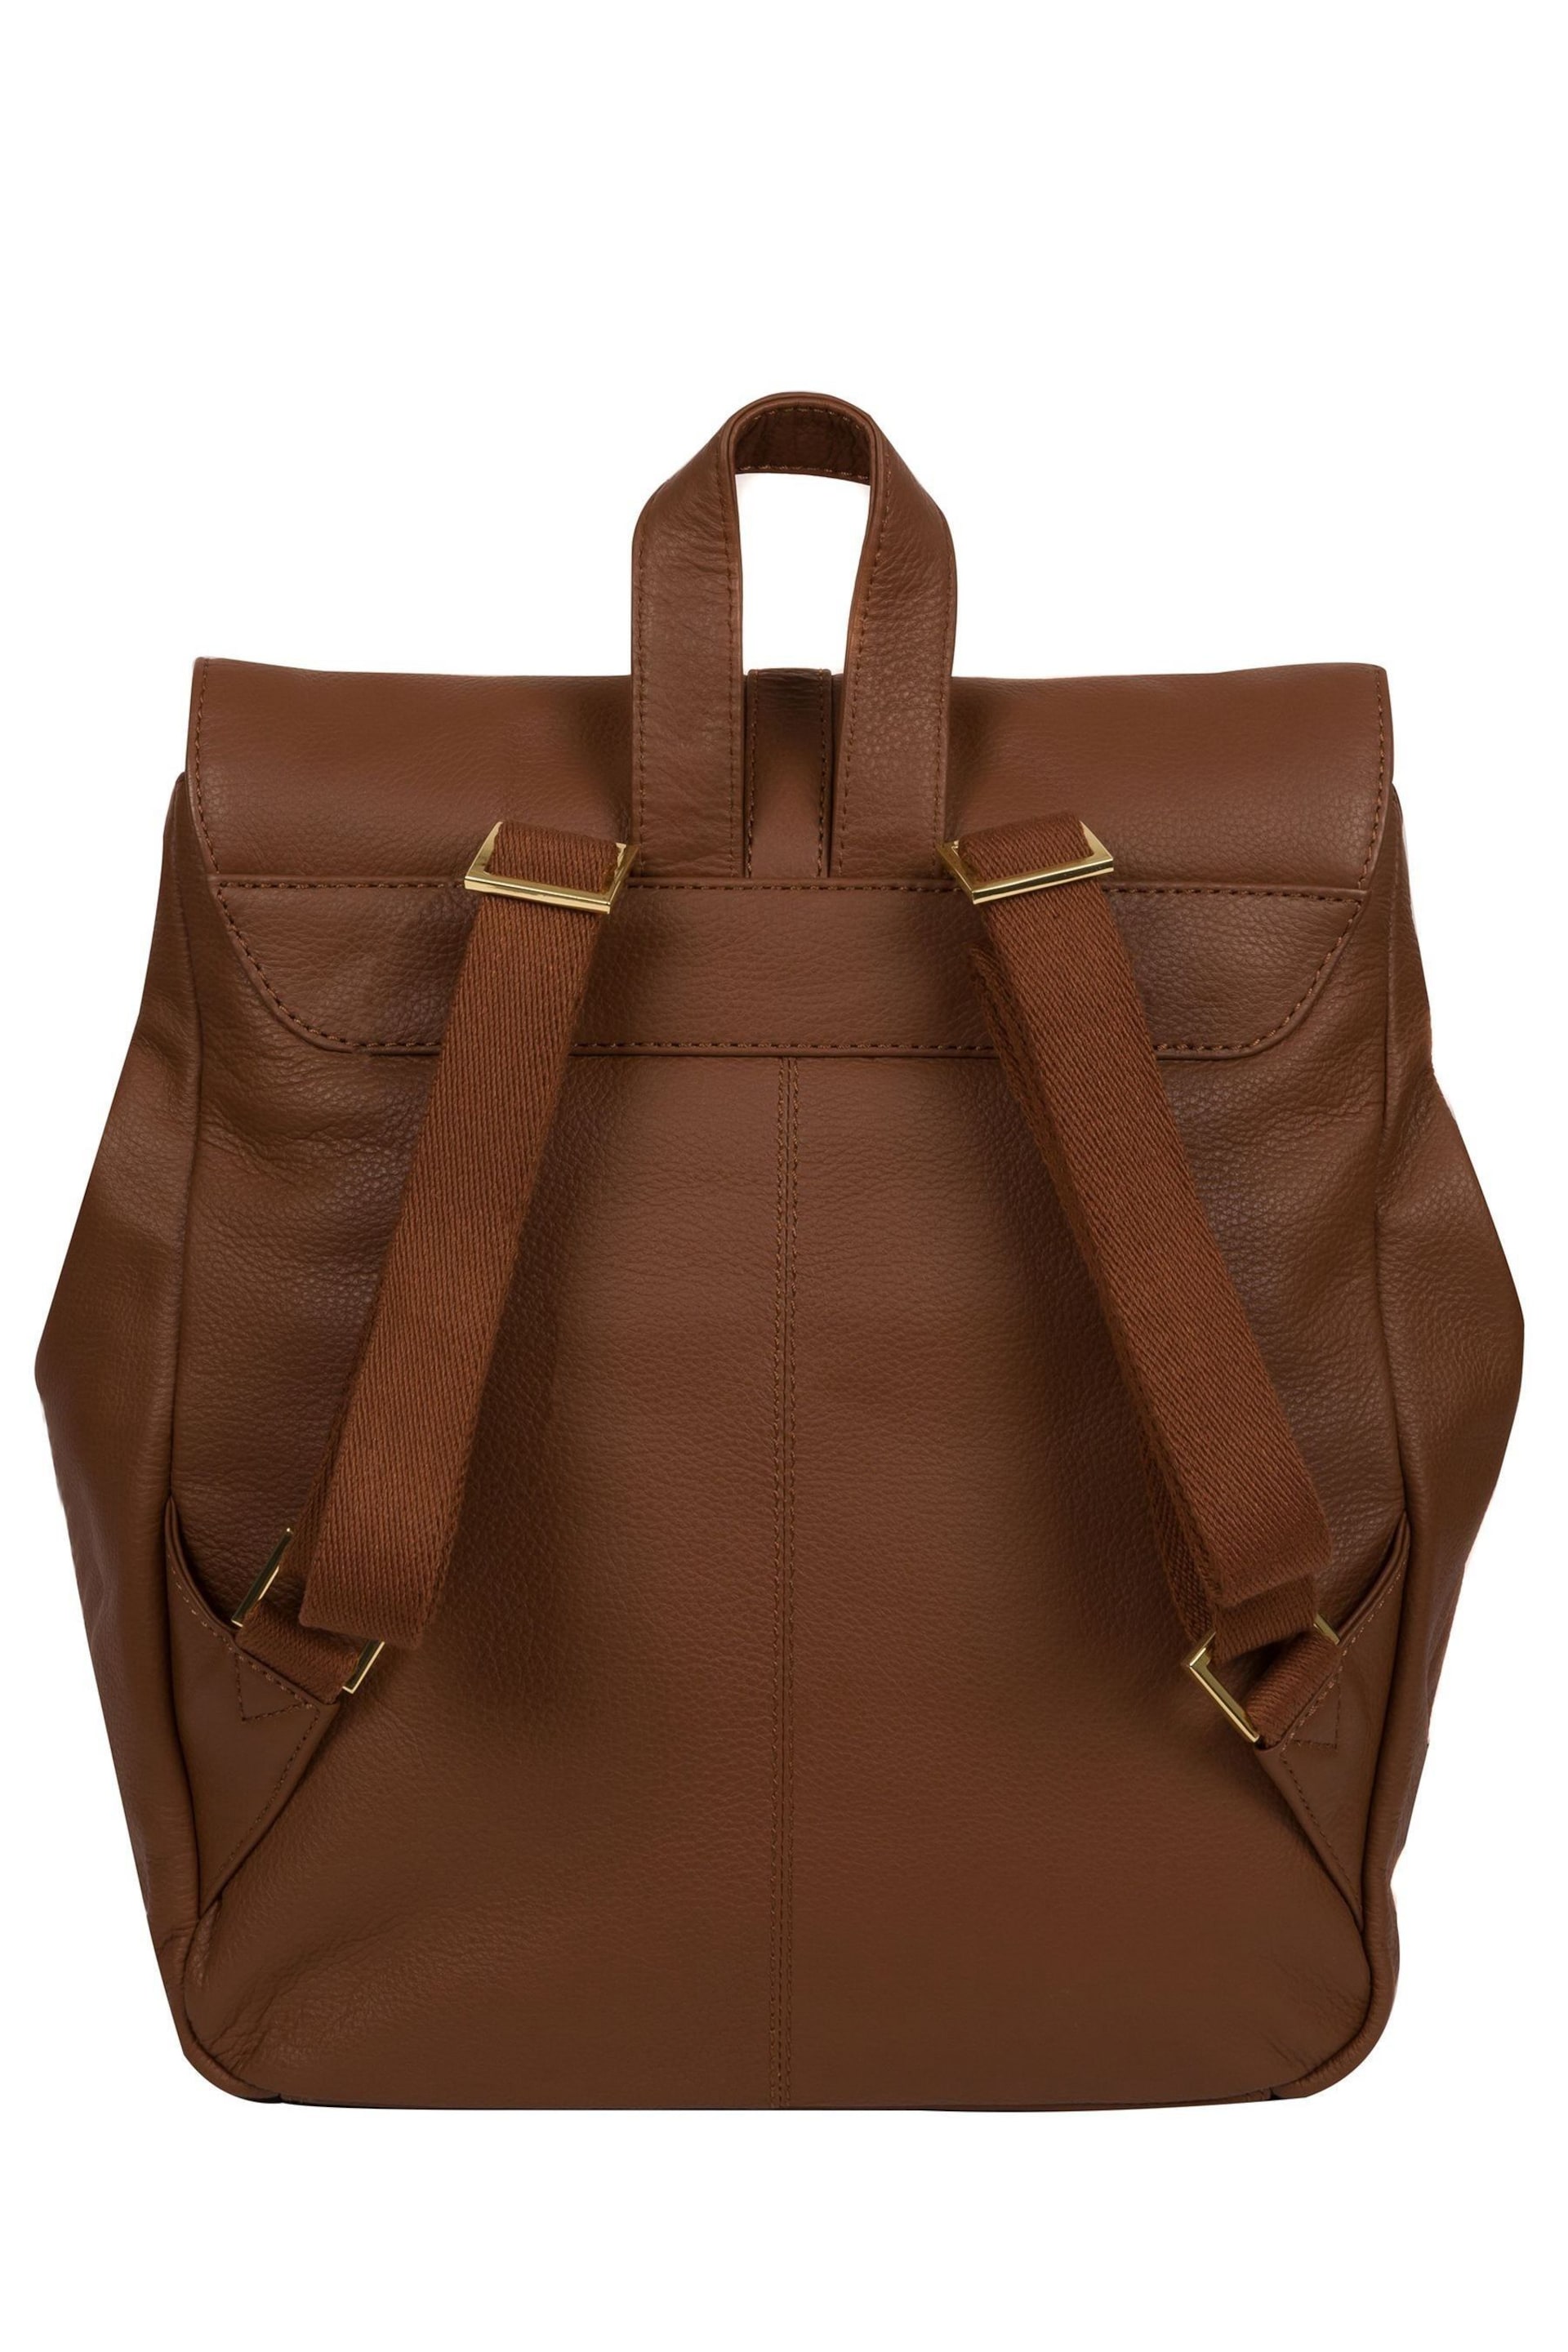 Pure Luxuries London Daisy Leather Backpack - Image 3 of 6